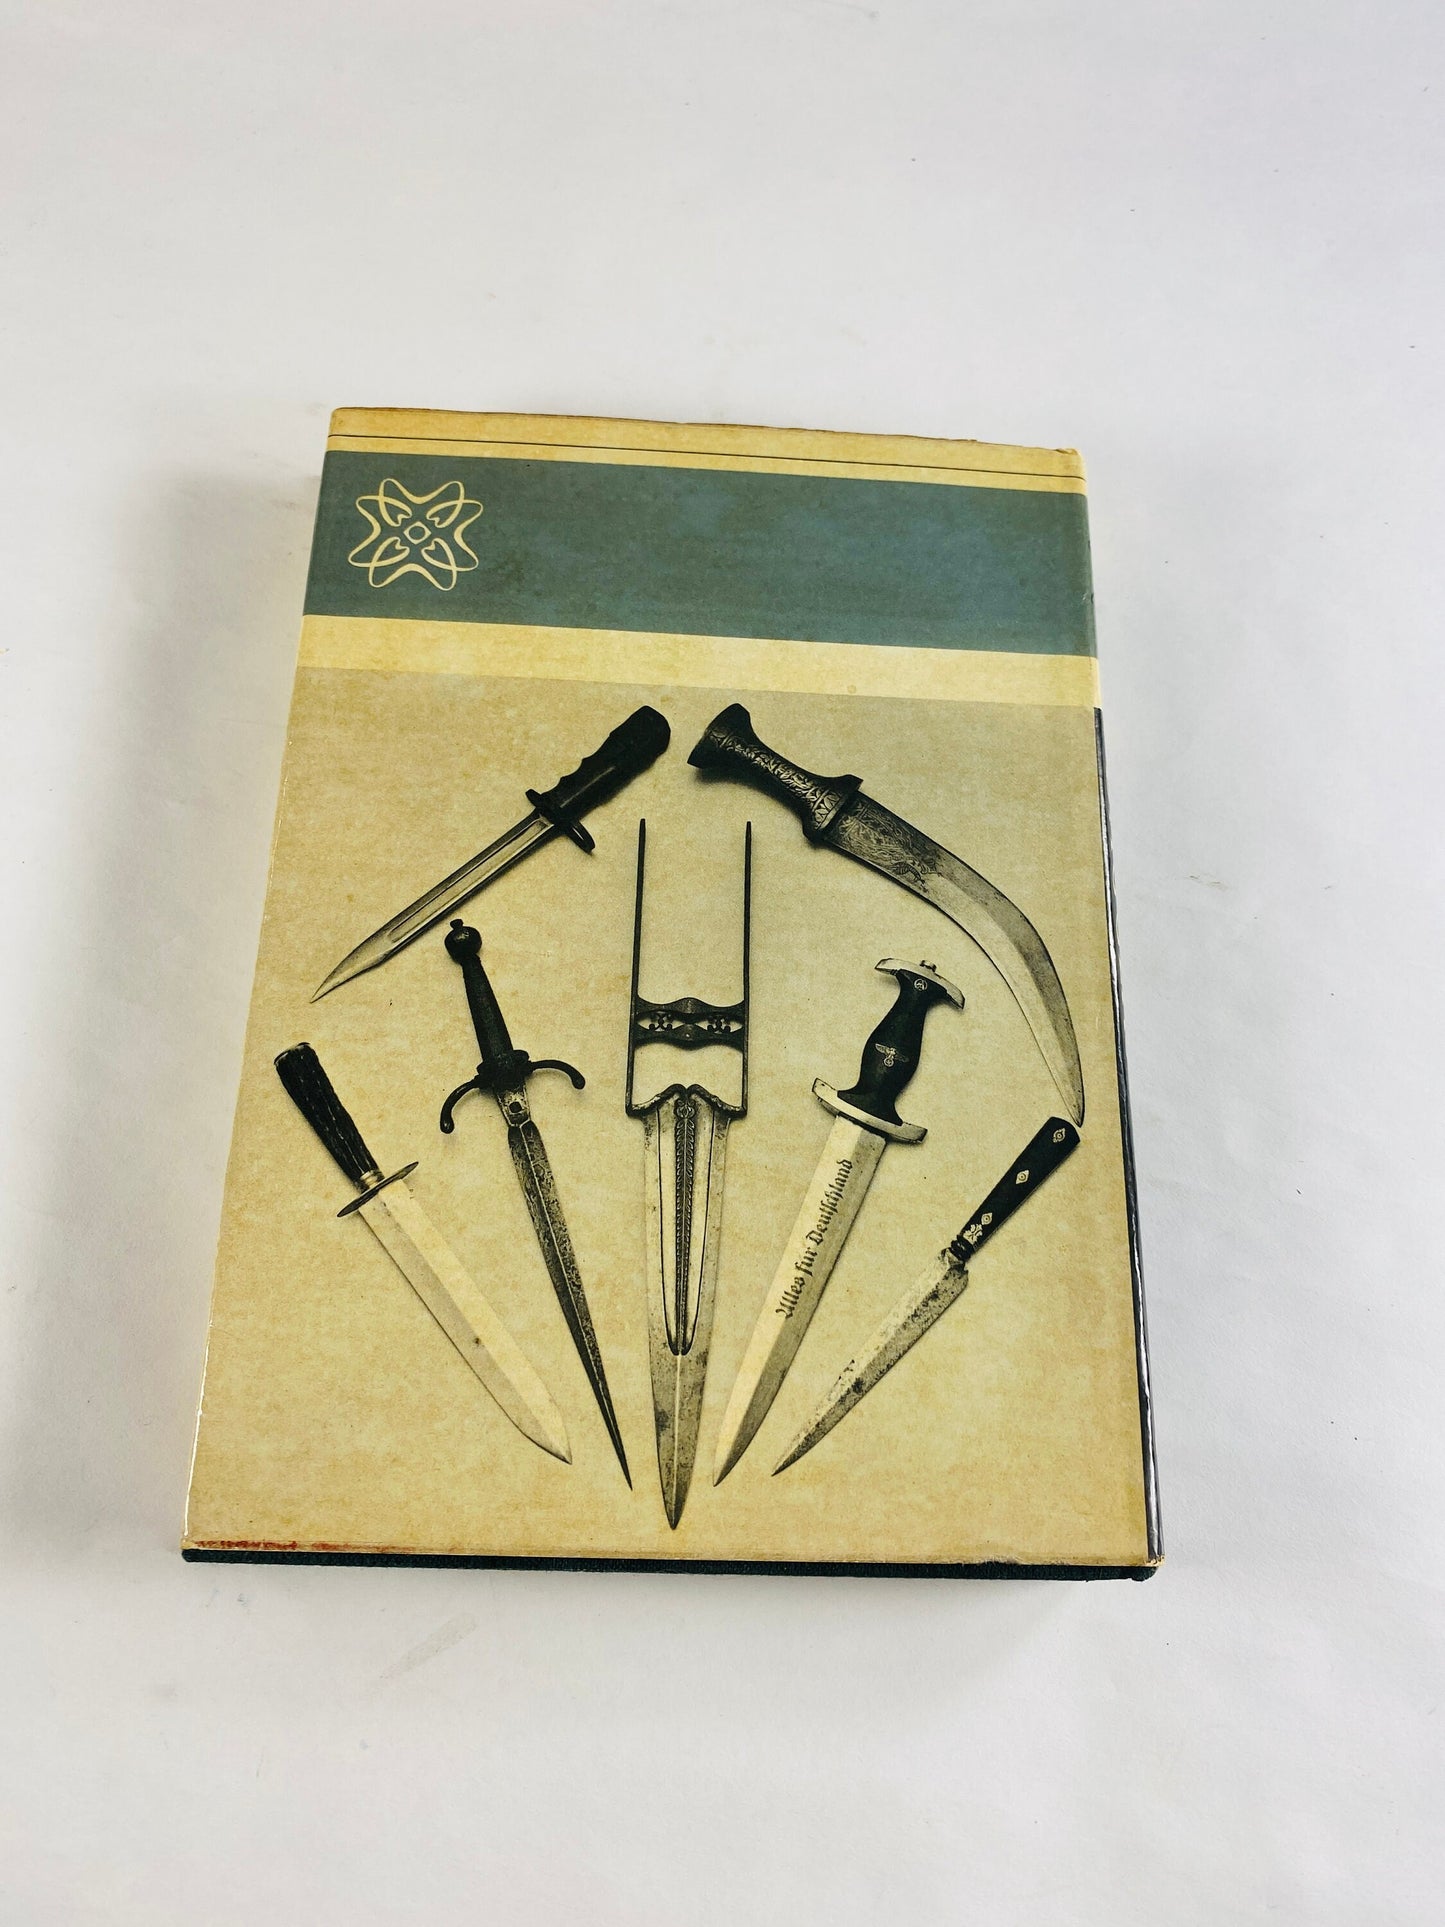 Swords & Daggers FIRST EDITION vintage book by Frederick Wilkinson circa 1968 photographs and drawings collector and enthusiast gift